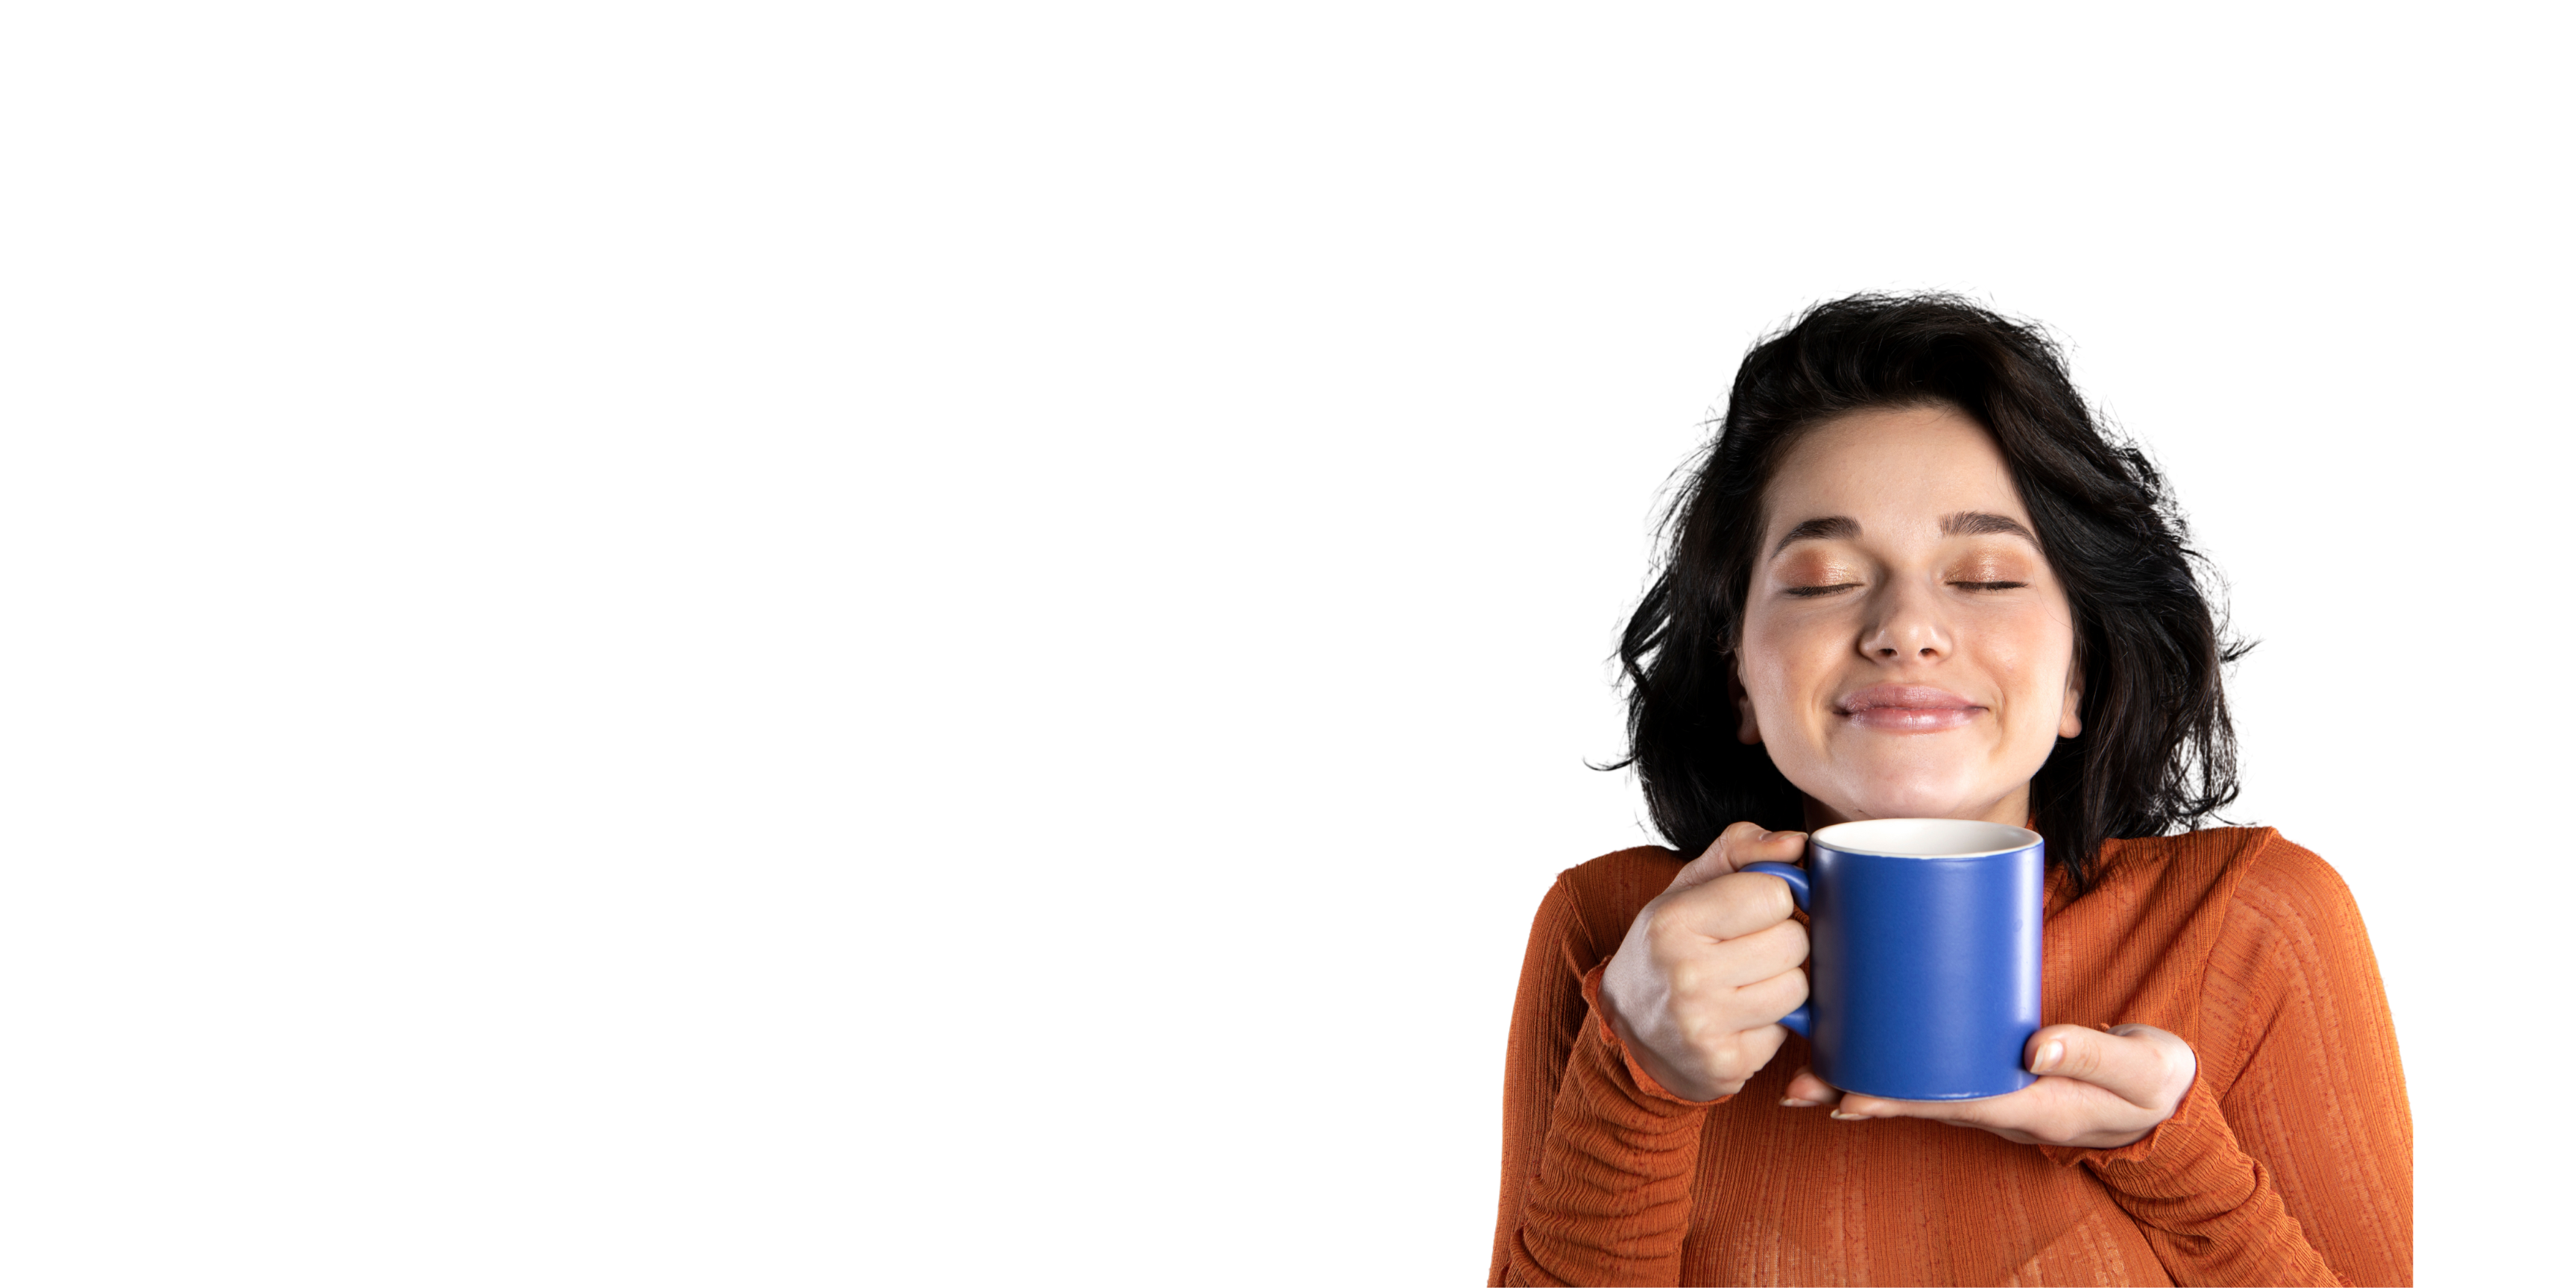 "A woman in an orange sweater enjoying a cup of coffee with a contented expression. The text beside her reads, 'Coffee like you won't believe.' followed by a button that says, 'Try Our Sample Packs.'"